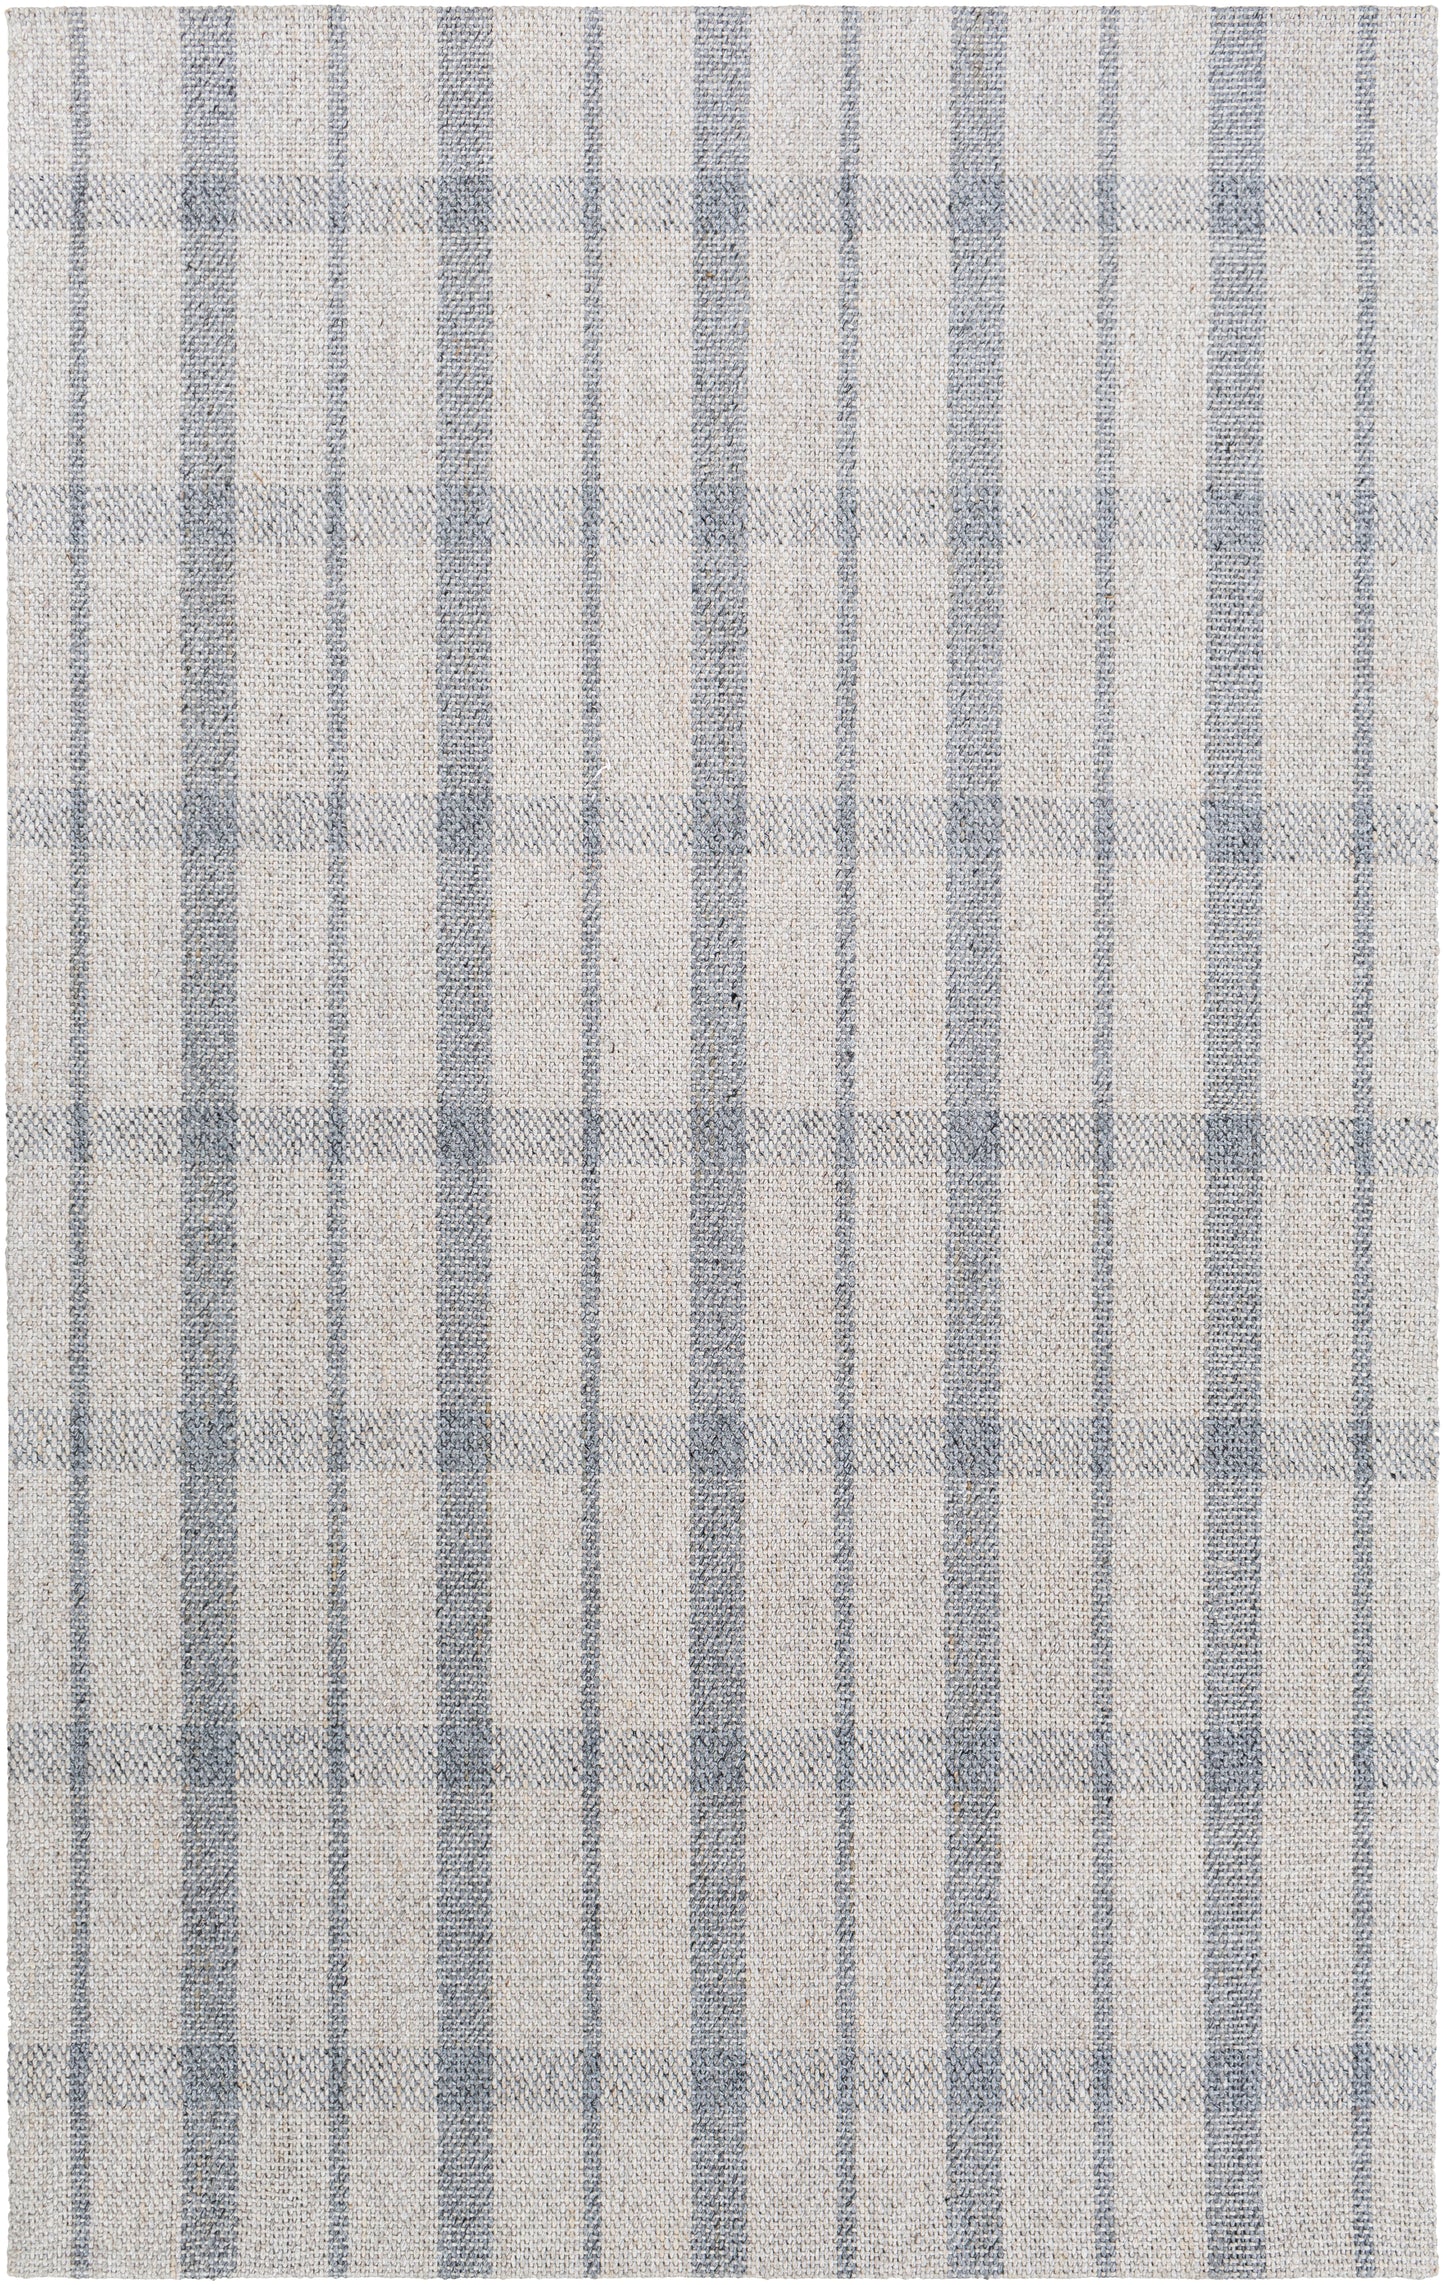 Tartan 27255 Hand Woven Synthetic Blend Indoor Area Rug by Surya Rugs